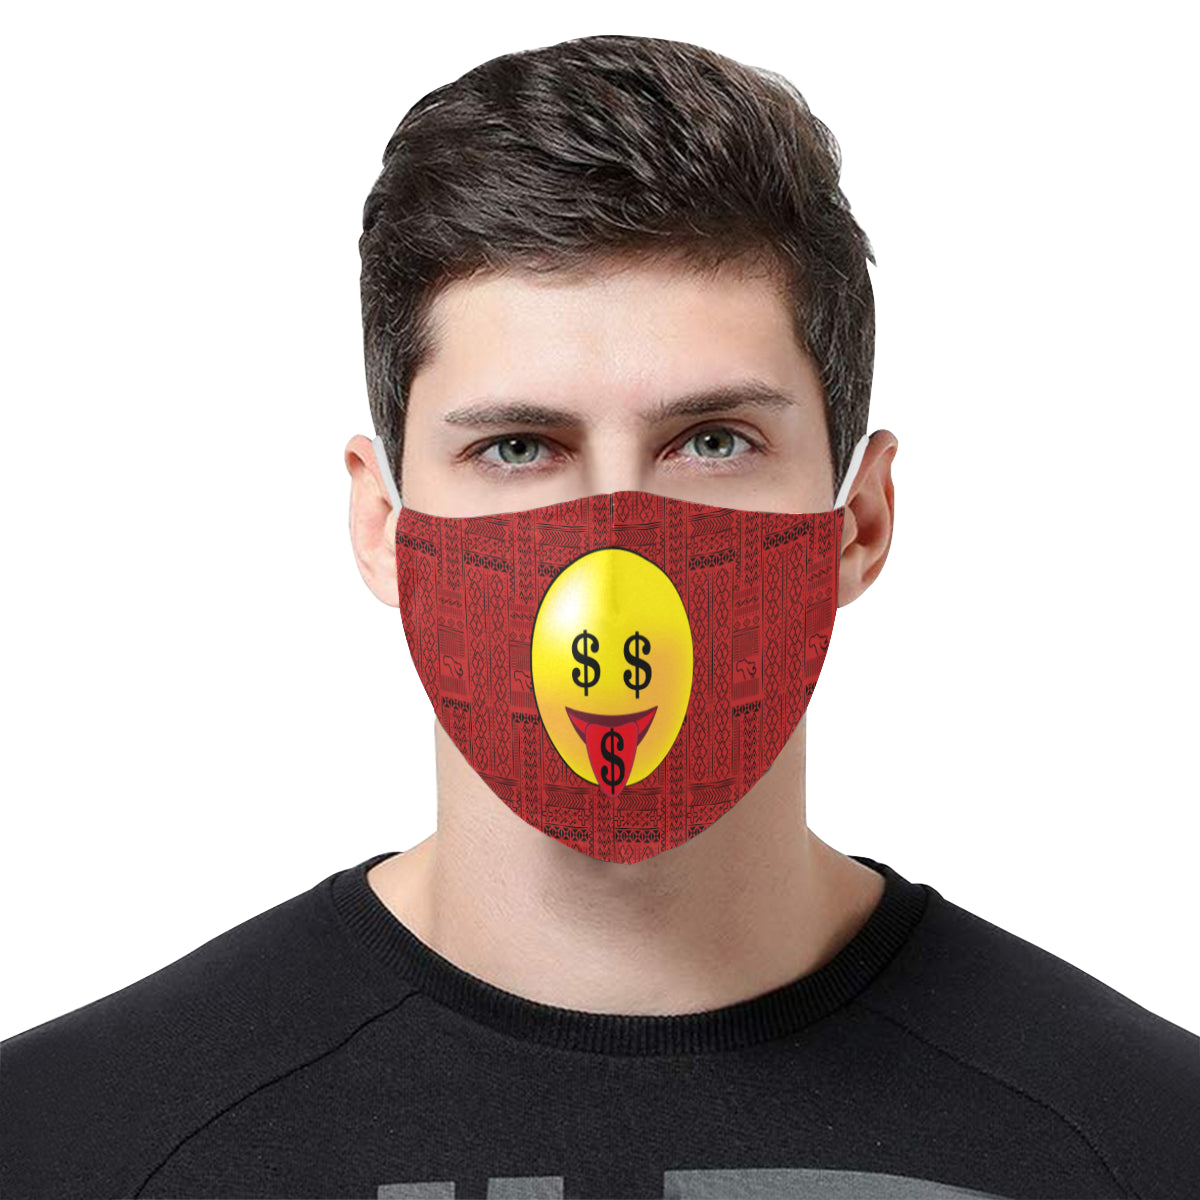 Like a Bawse! Tribal Print Emoji Cotton Fabric Face Mask with Filter Slot & Adjustable Strap - Non-medical use (2 Filters Included)